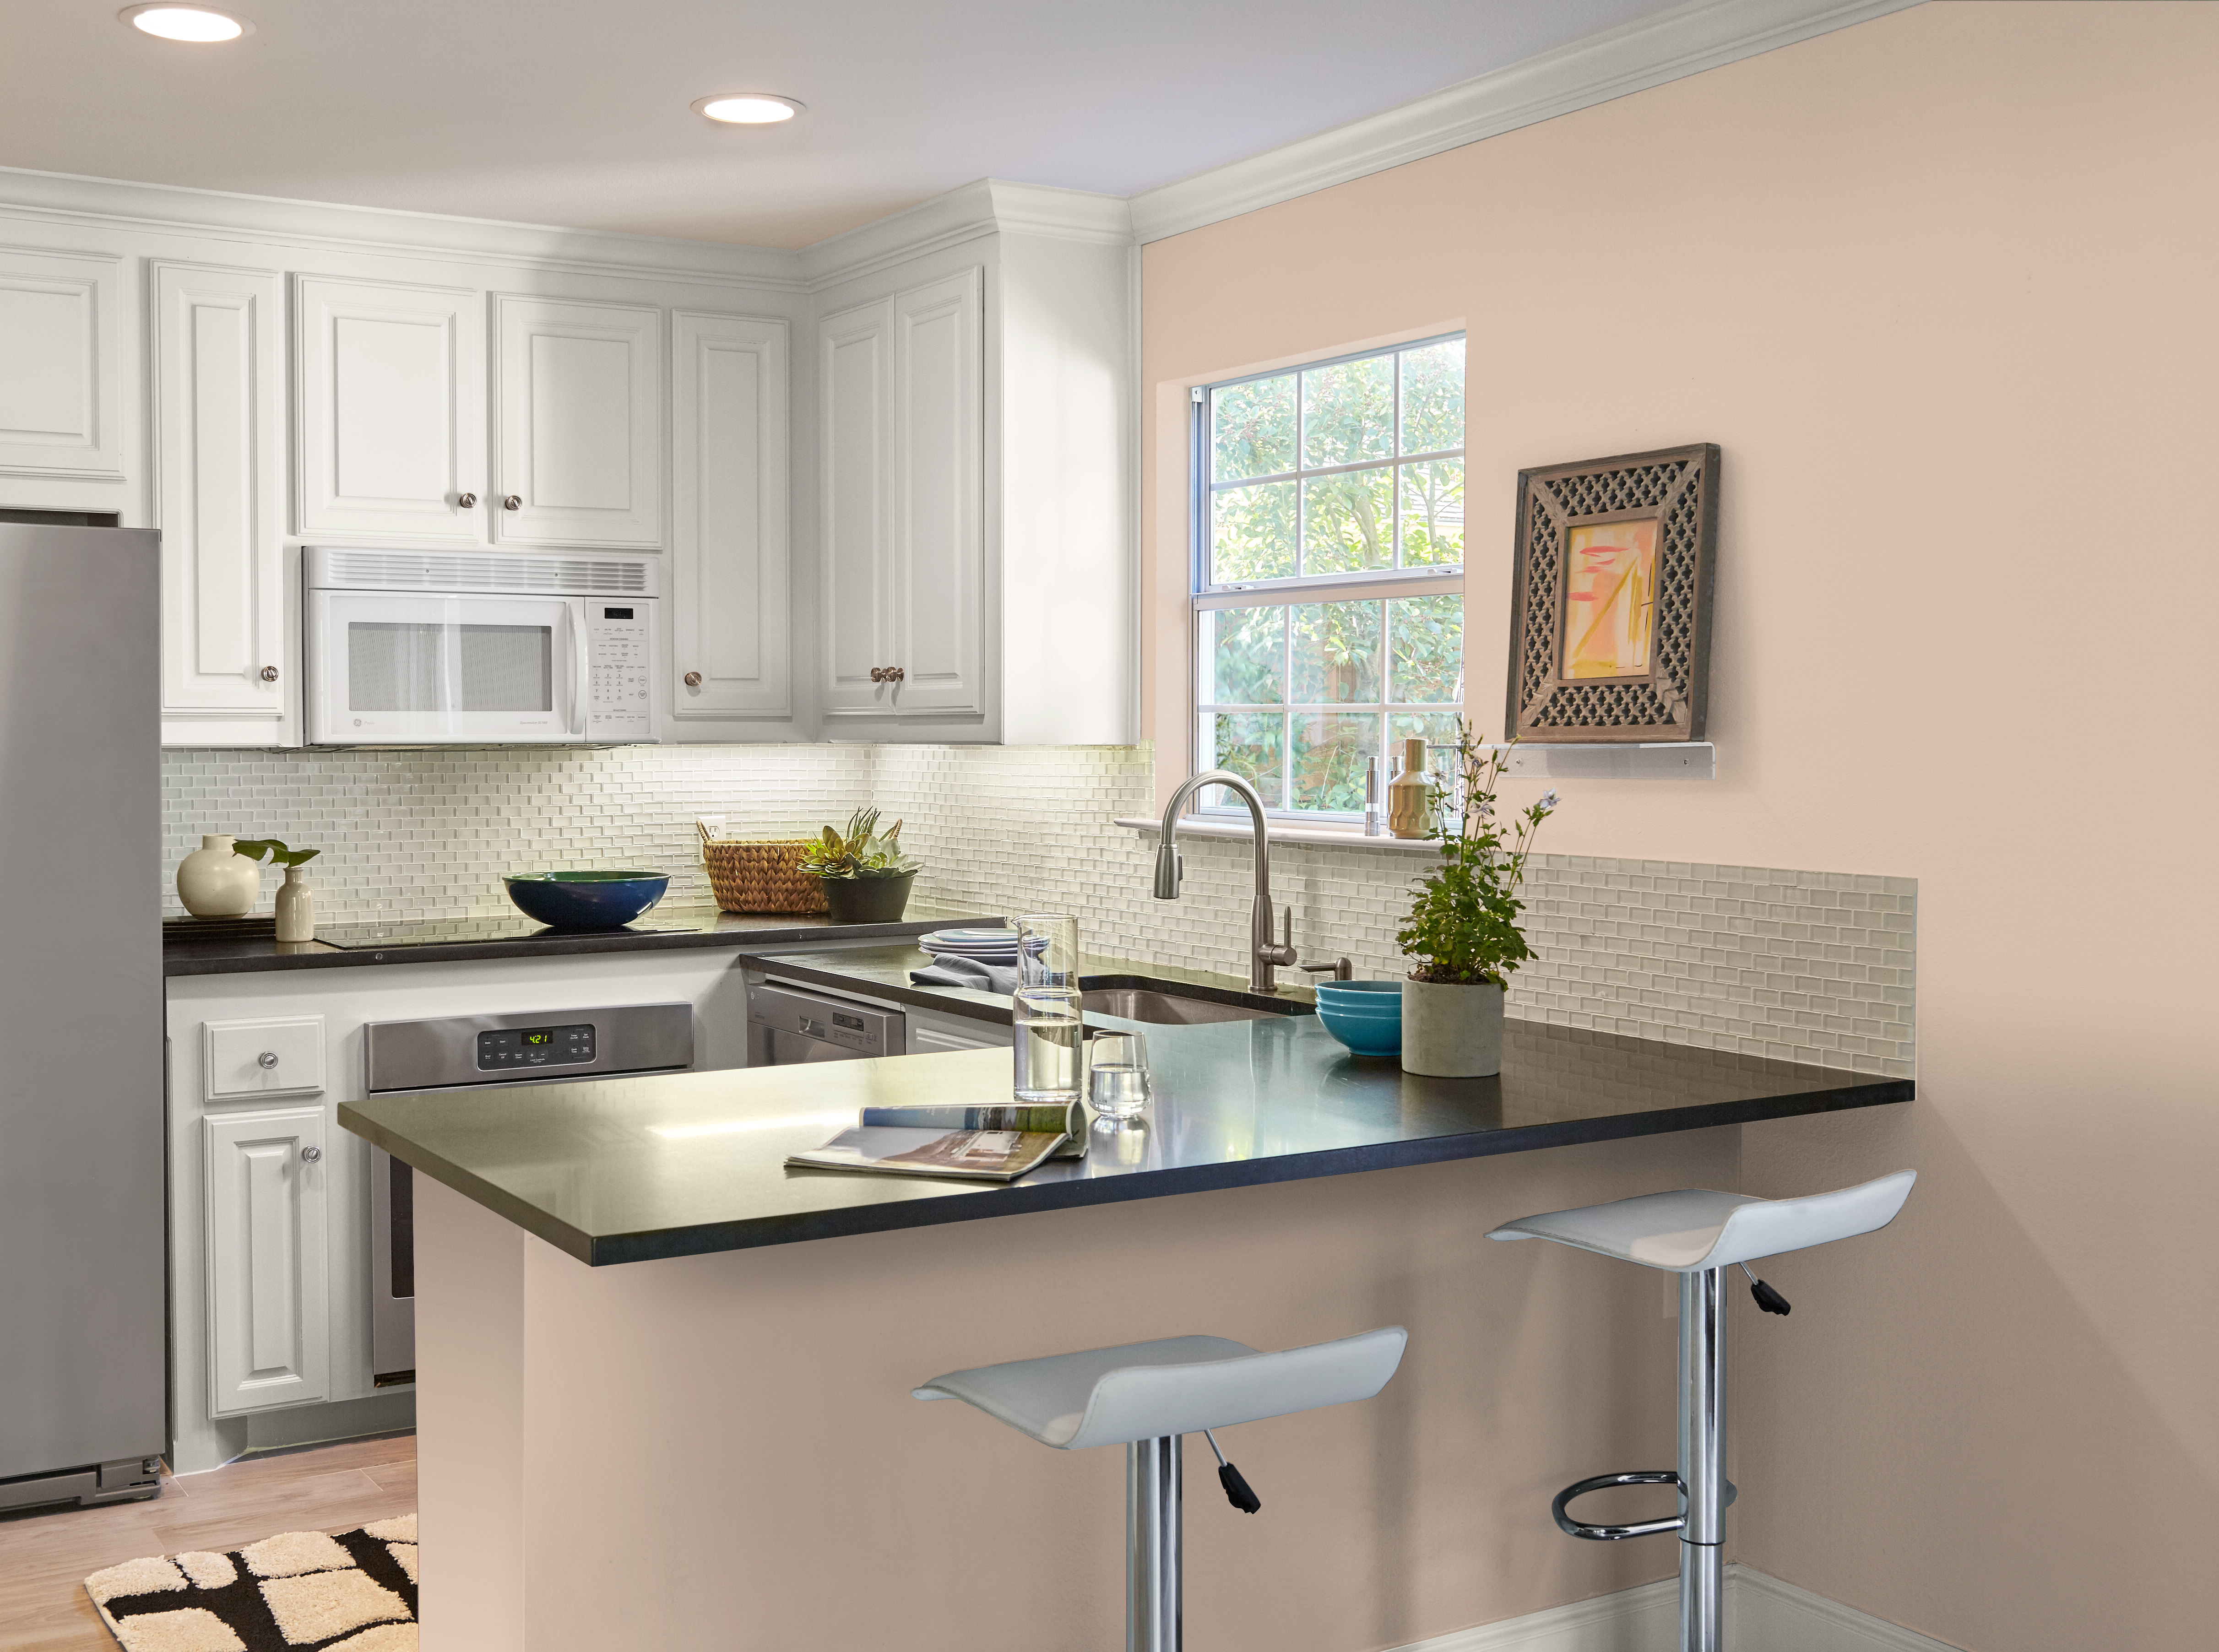 Image of a kitchen with Behr paint on walls, cabinetry and trim